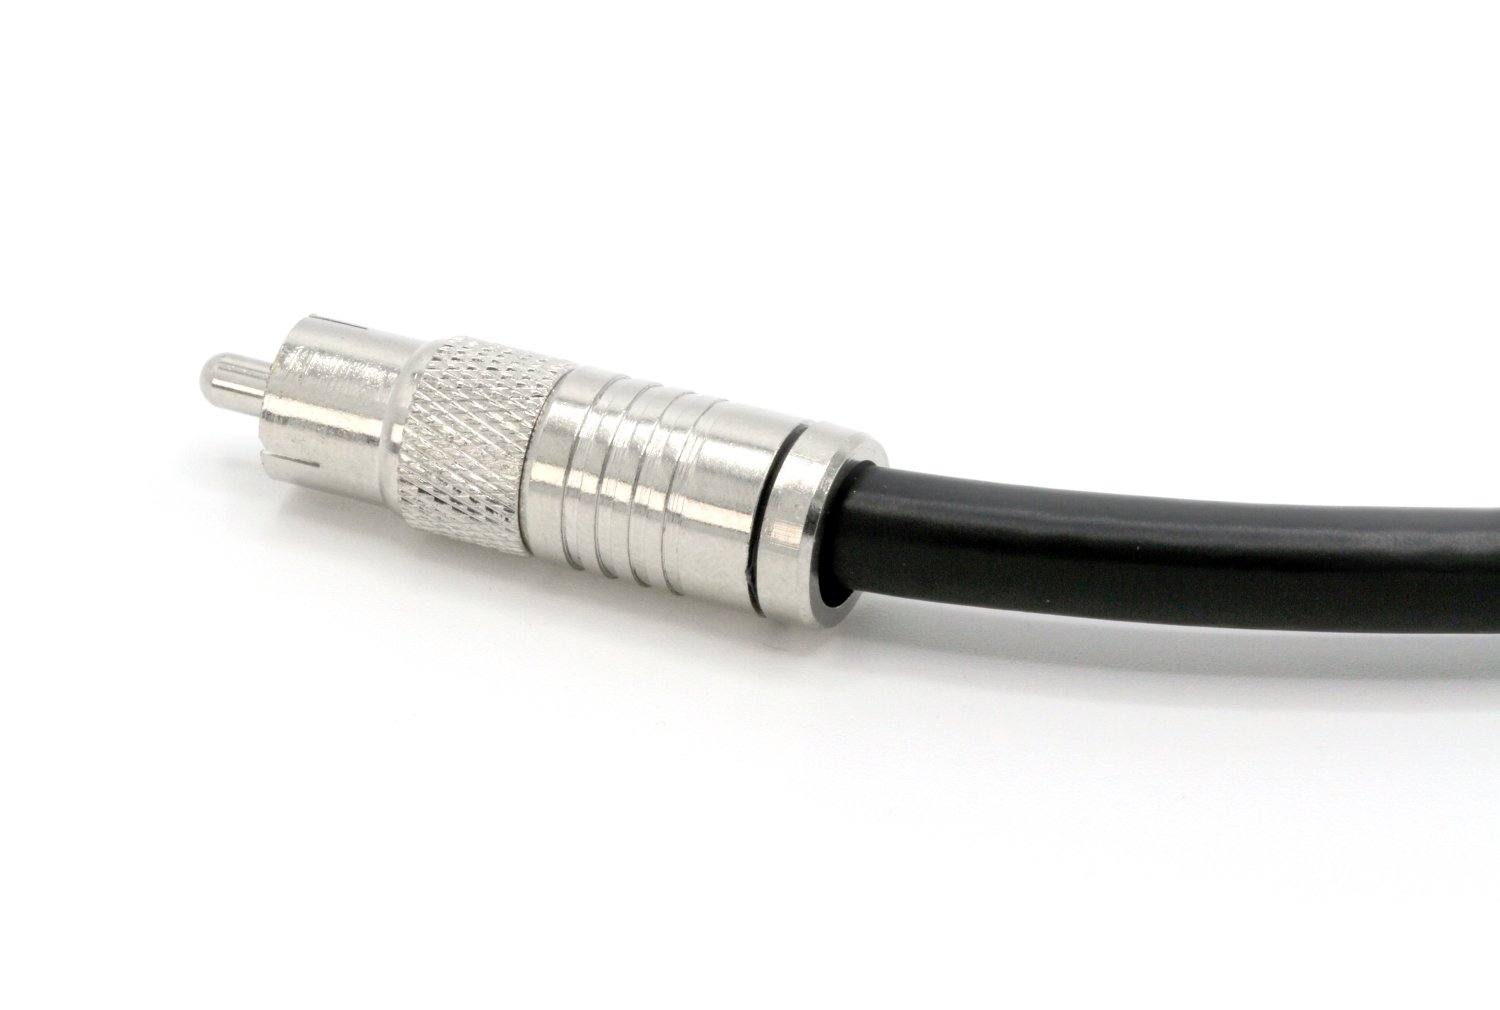 THE CIMPLE CO - Digital Audio Coaxial Cable - Subwoofer Cable - (S/PDIF) RCA Cable, 200 Feet - image 3 of 6